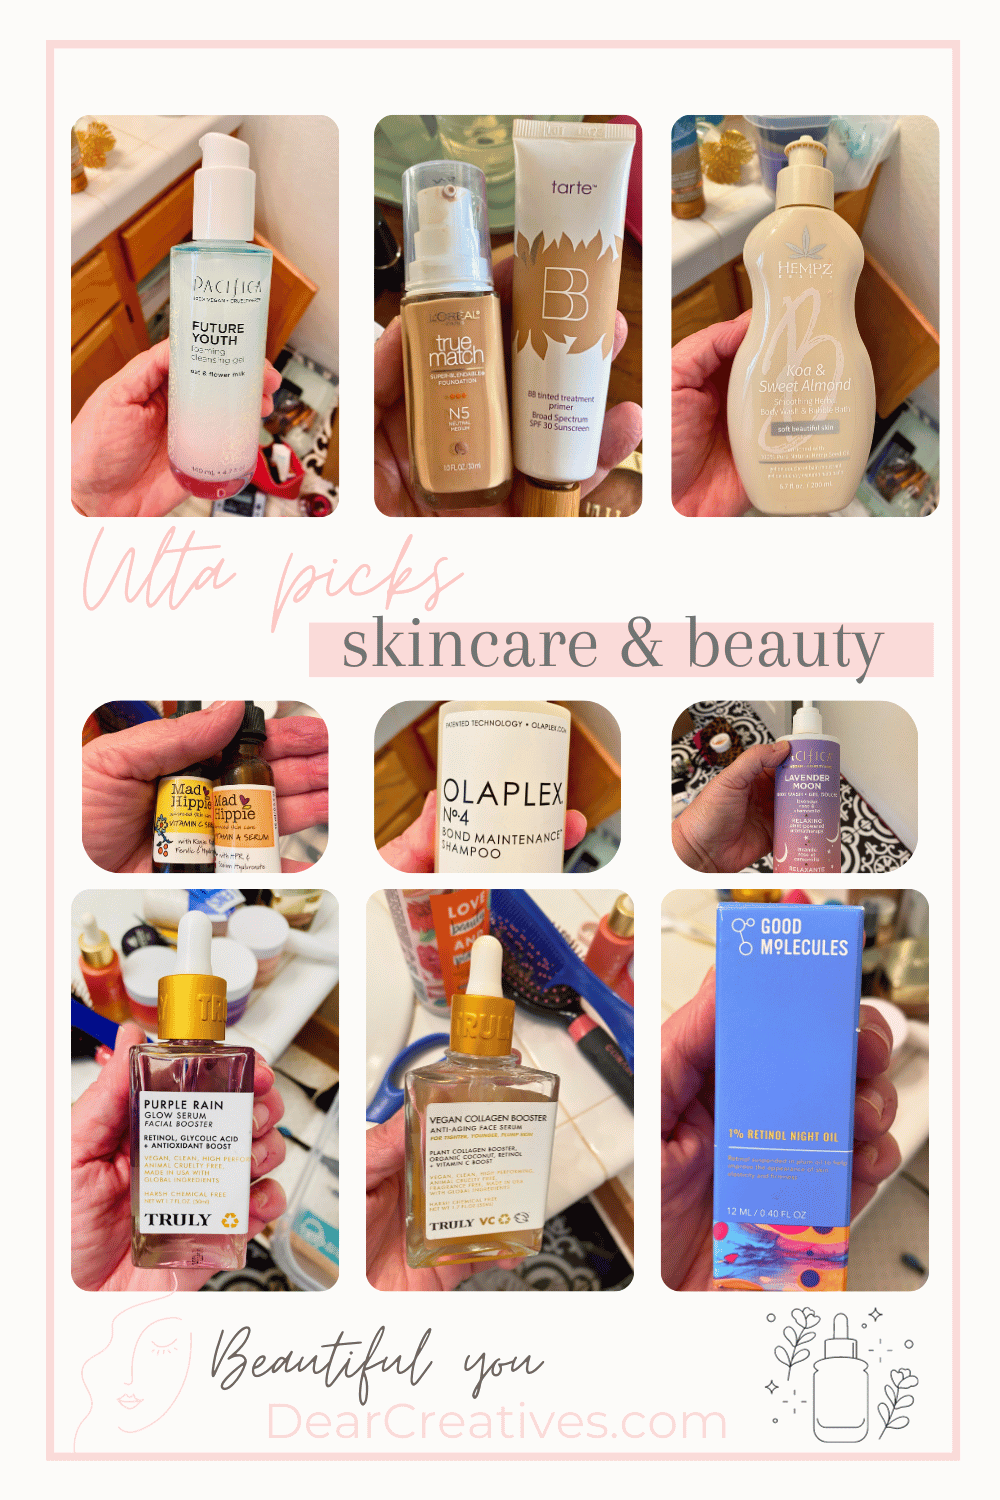 Skincare, makeup, shampoo, body soaps. Cosmetics, beauty products, and skincare on sale. Find out more at DearCreatives.com